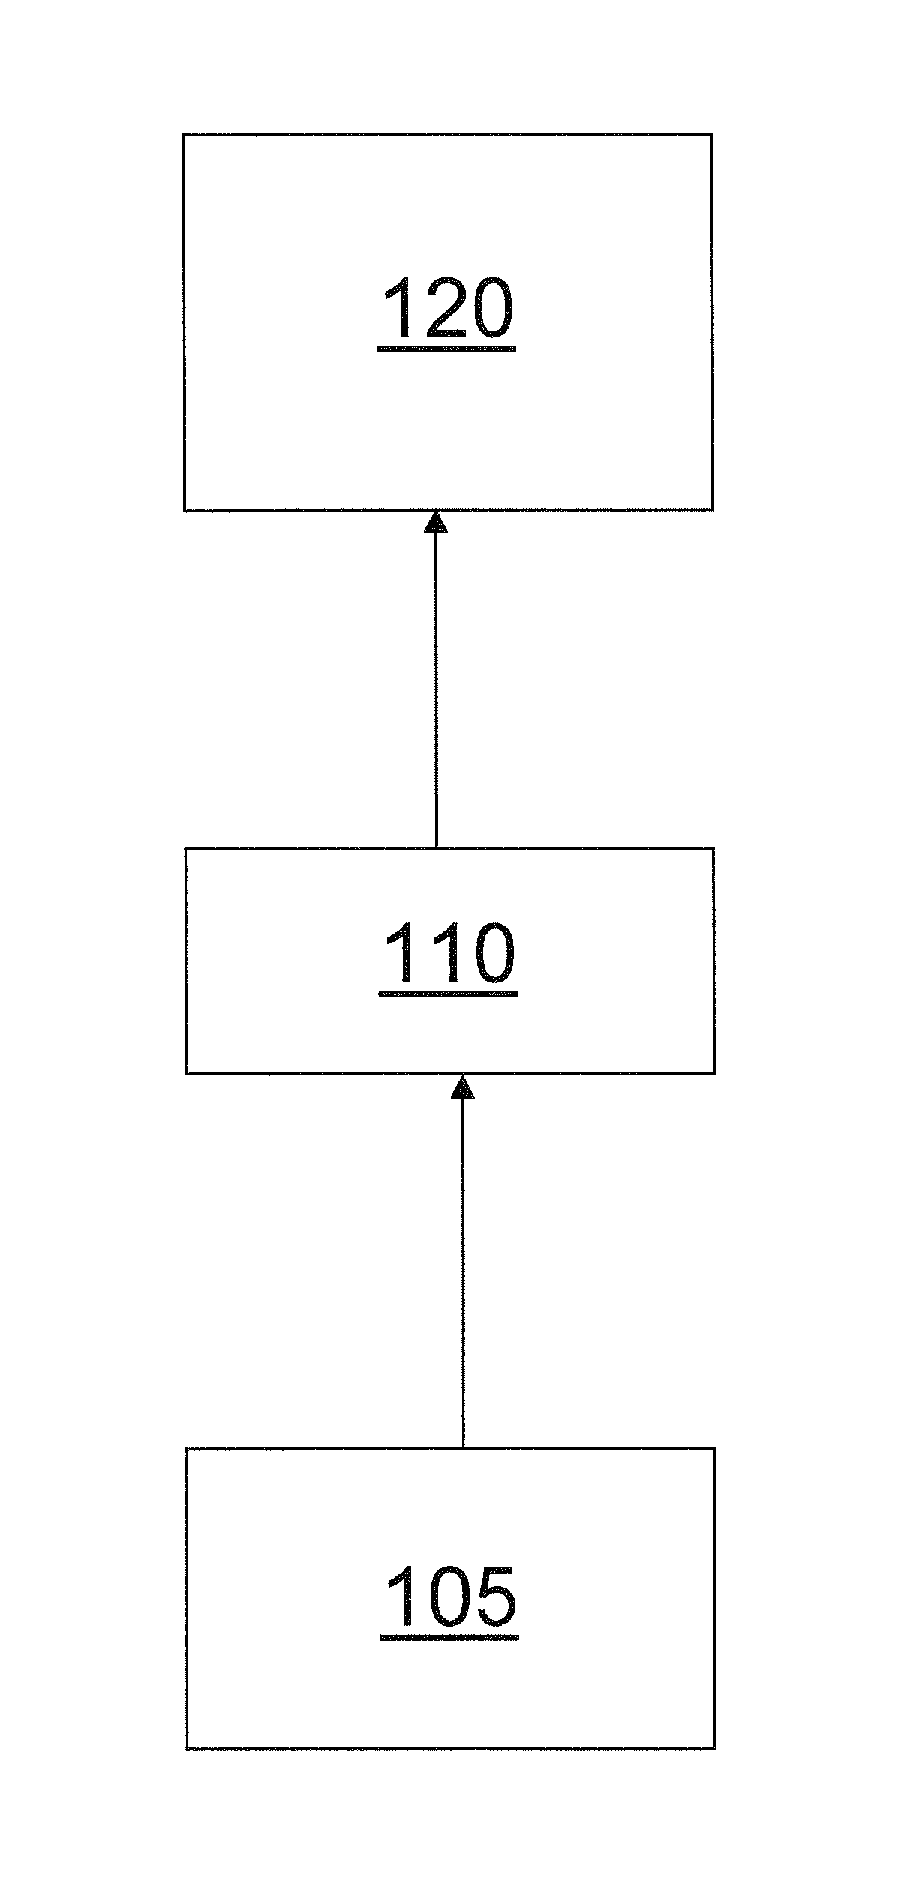 Apparatus and method for determining an emotion state of a speaker